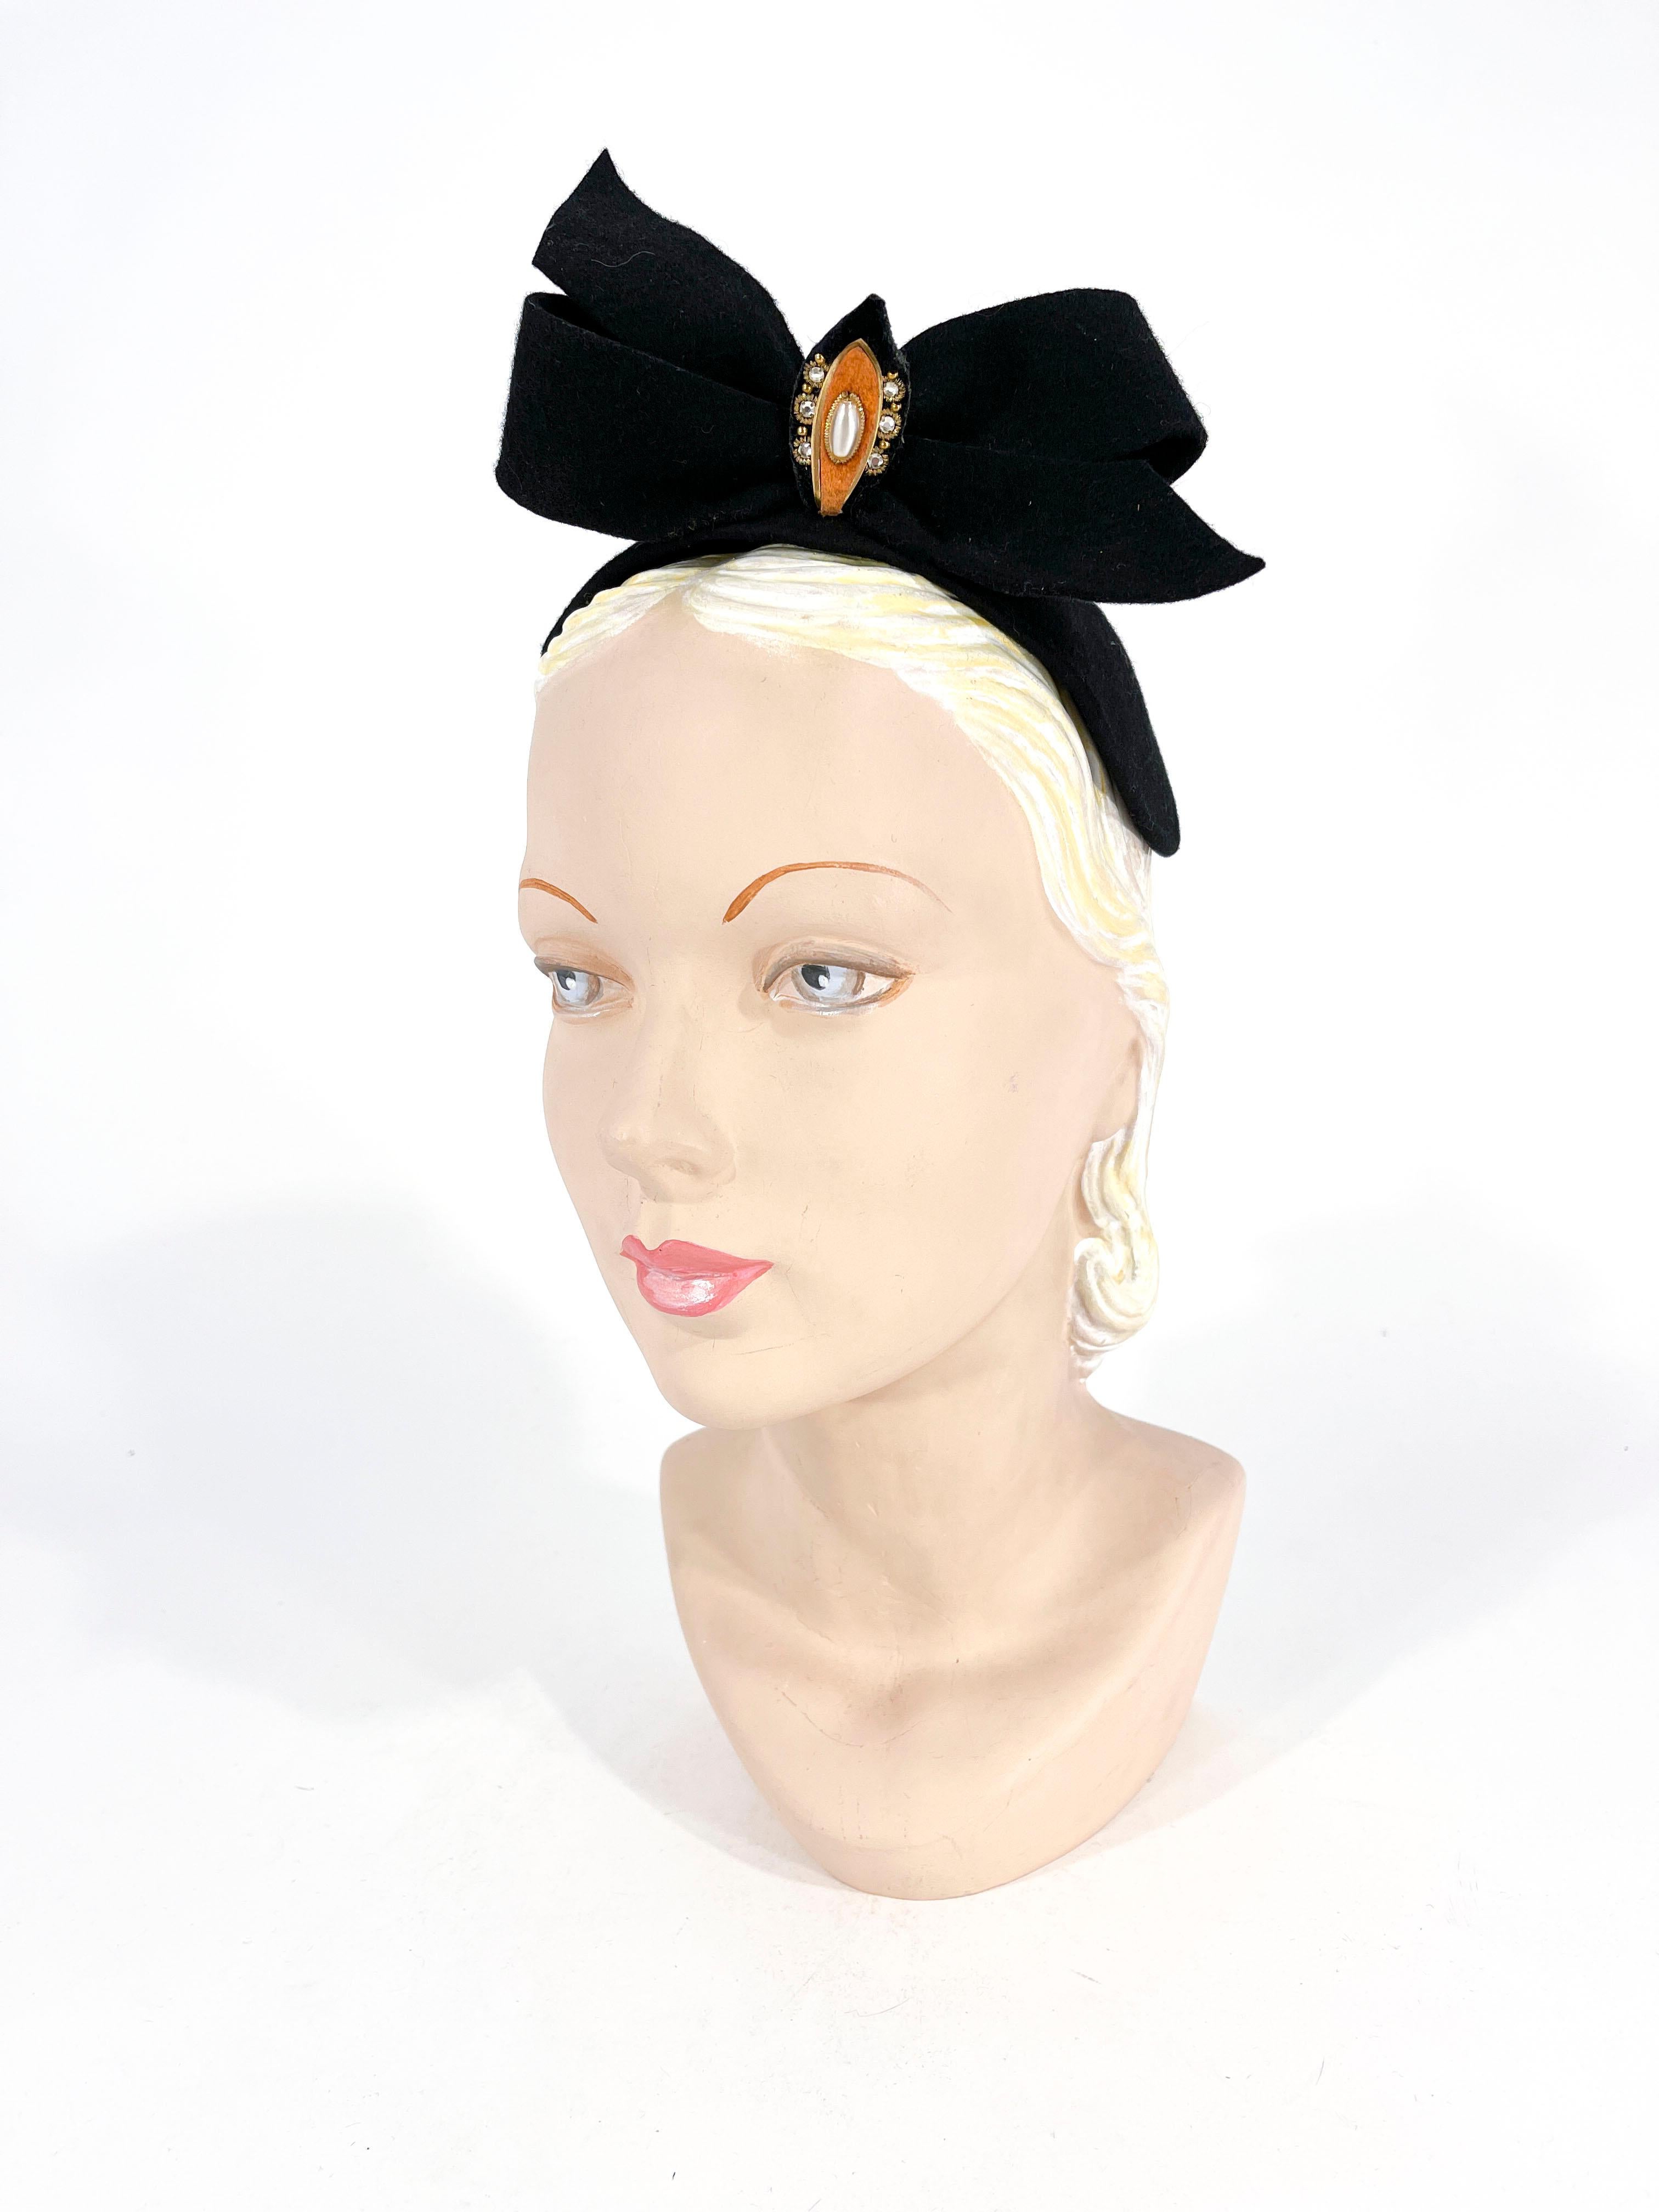 1930s Hand-sculpted beaver fur felt cocktail hat in the silhouette of the skull cap. It is decorated with an enlarged bow and decorated with a rhinestone, pearl, brass and felt accent. The interior of the hat is unlined and the frame of the hat is